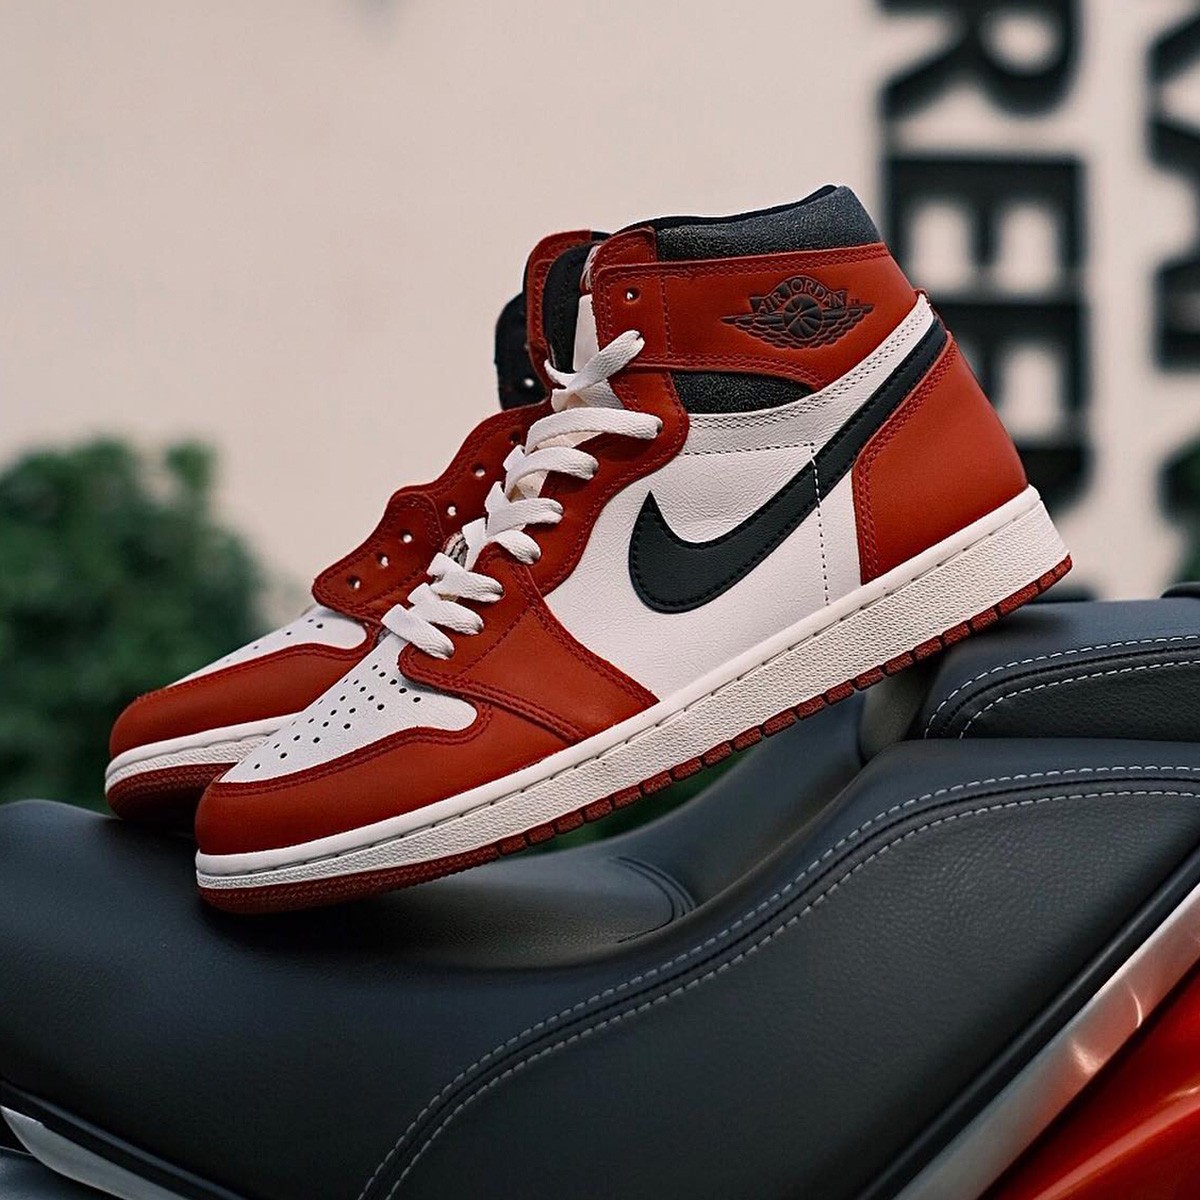 At risk somewhere Logically Sneak Peek: The Most Hyped Jordan Release Of The Year – SNEAKER THRONE